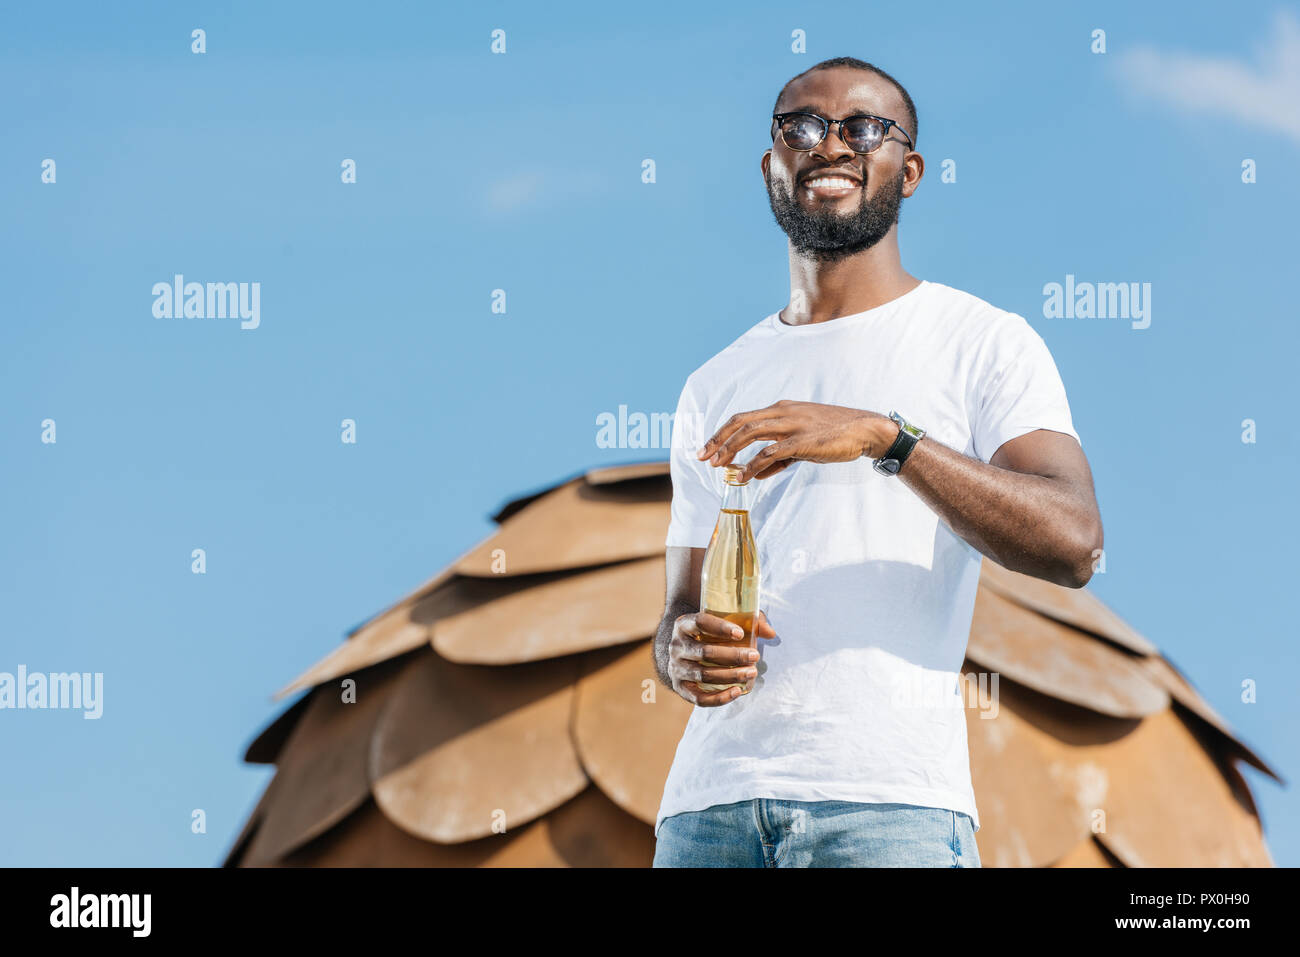 smiling handsome african american man opening soda bottle against blue sky Stock Photo